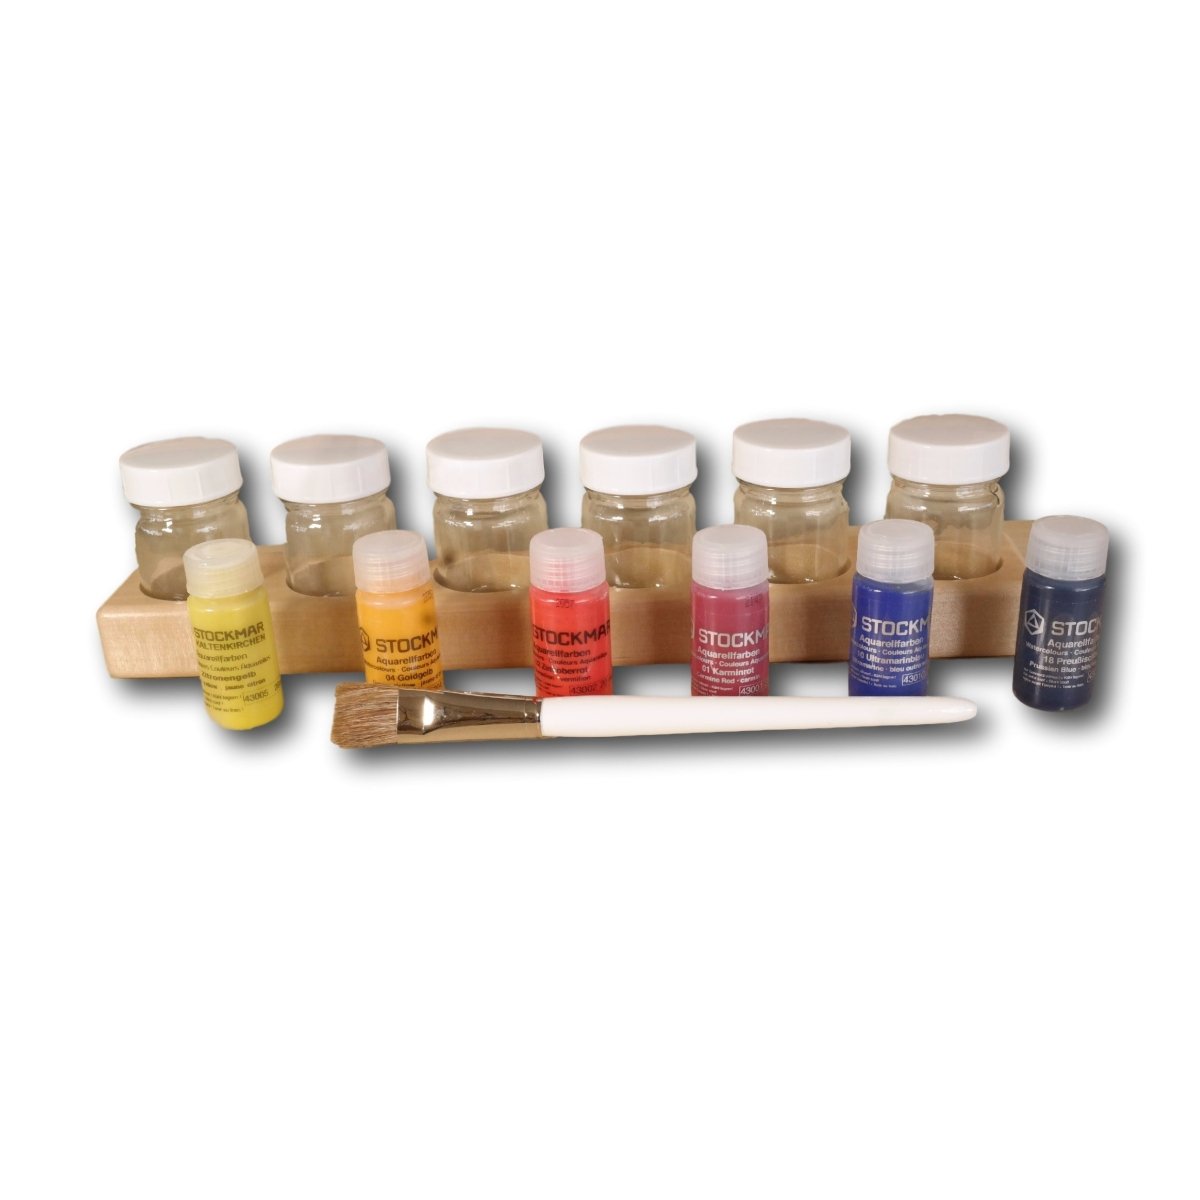 6 Jar Paint Holder with Stockmar Waterpaint and Paint Brush